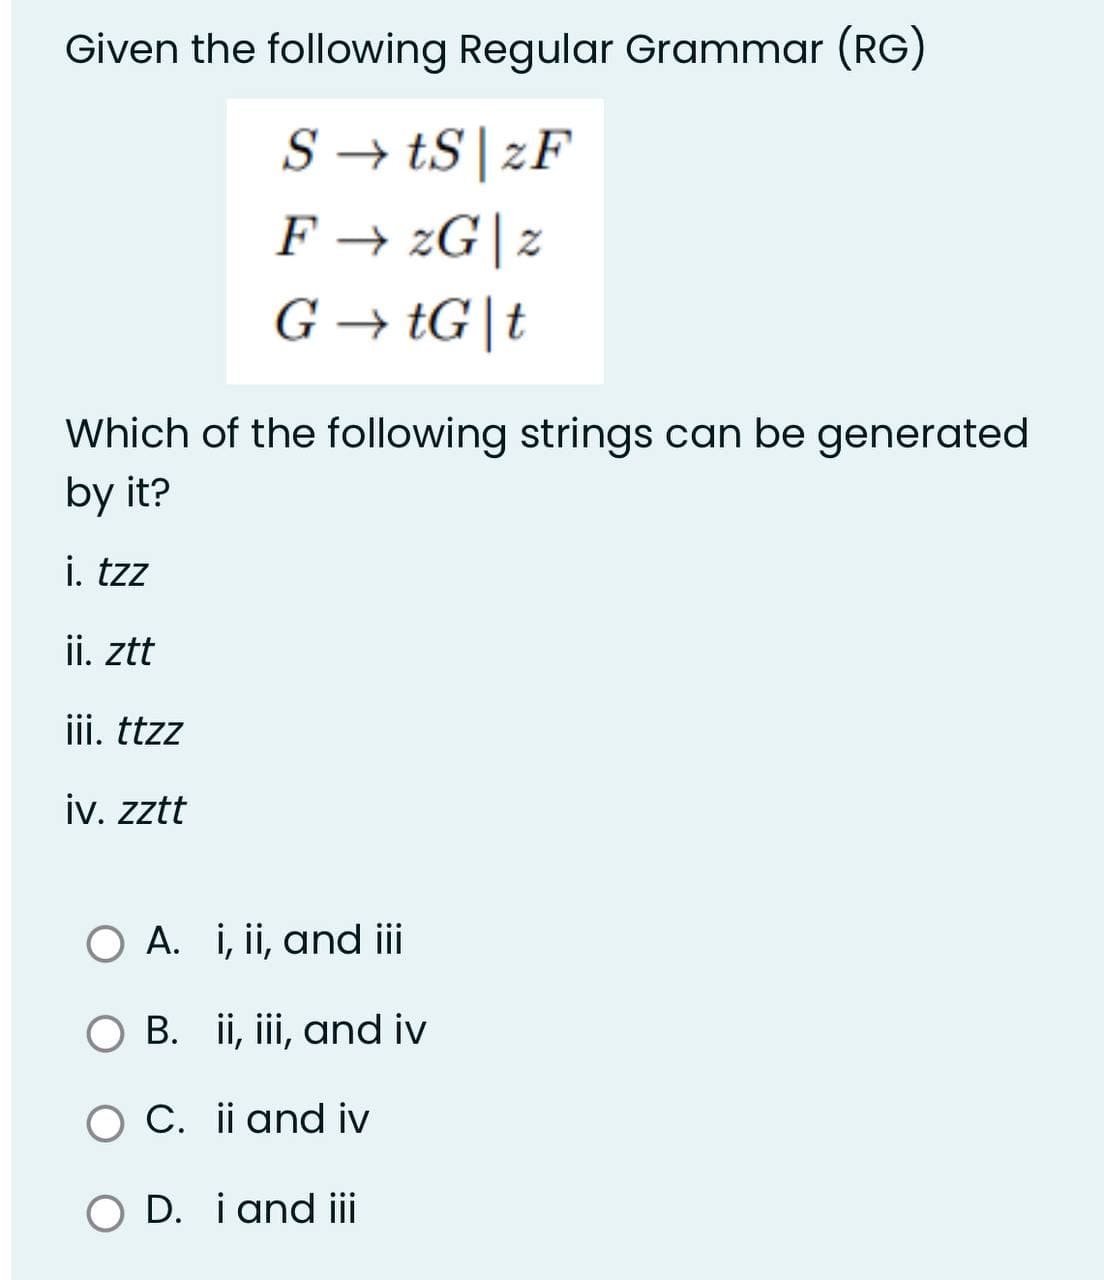 Given the following Regular Grammar (RG)
StS zF
F→ 2G|z
G→tG|t
Which of the following strings can be generated
by it?
i. tzz
ii. ztt
iii. ttzz
iv. zztt
O A. i, ii, and iii
B. ii, iii, and iv
O C. ii and iv
O D. i and iii